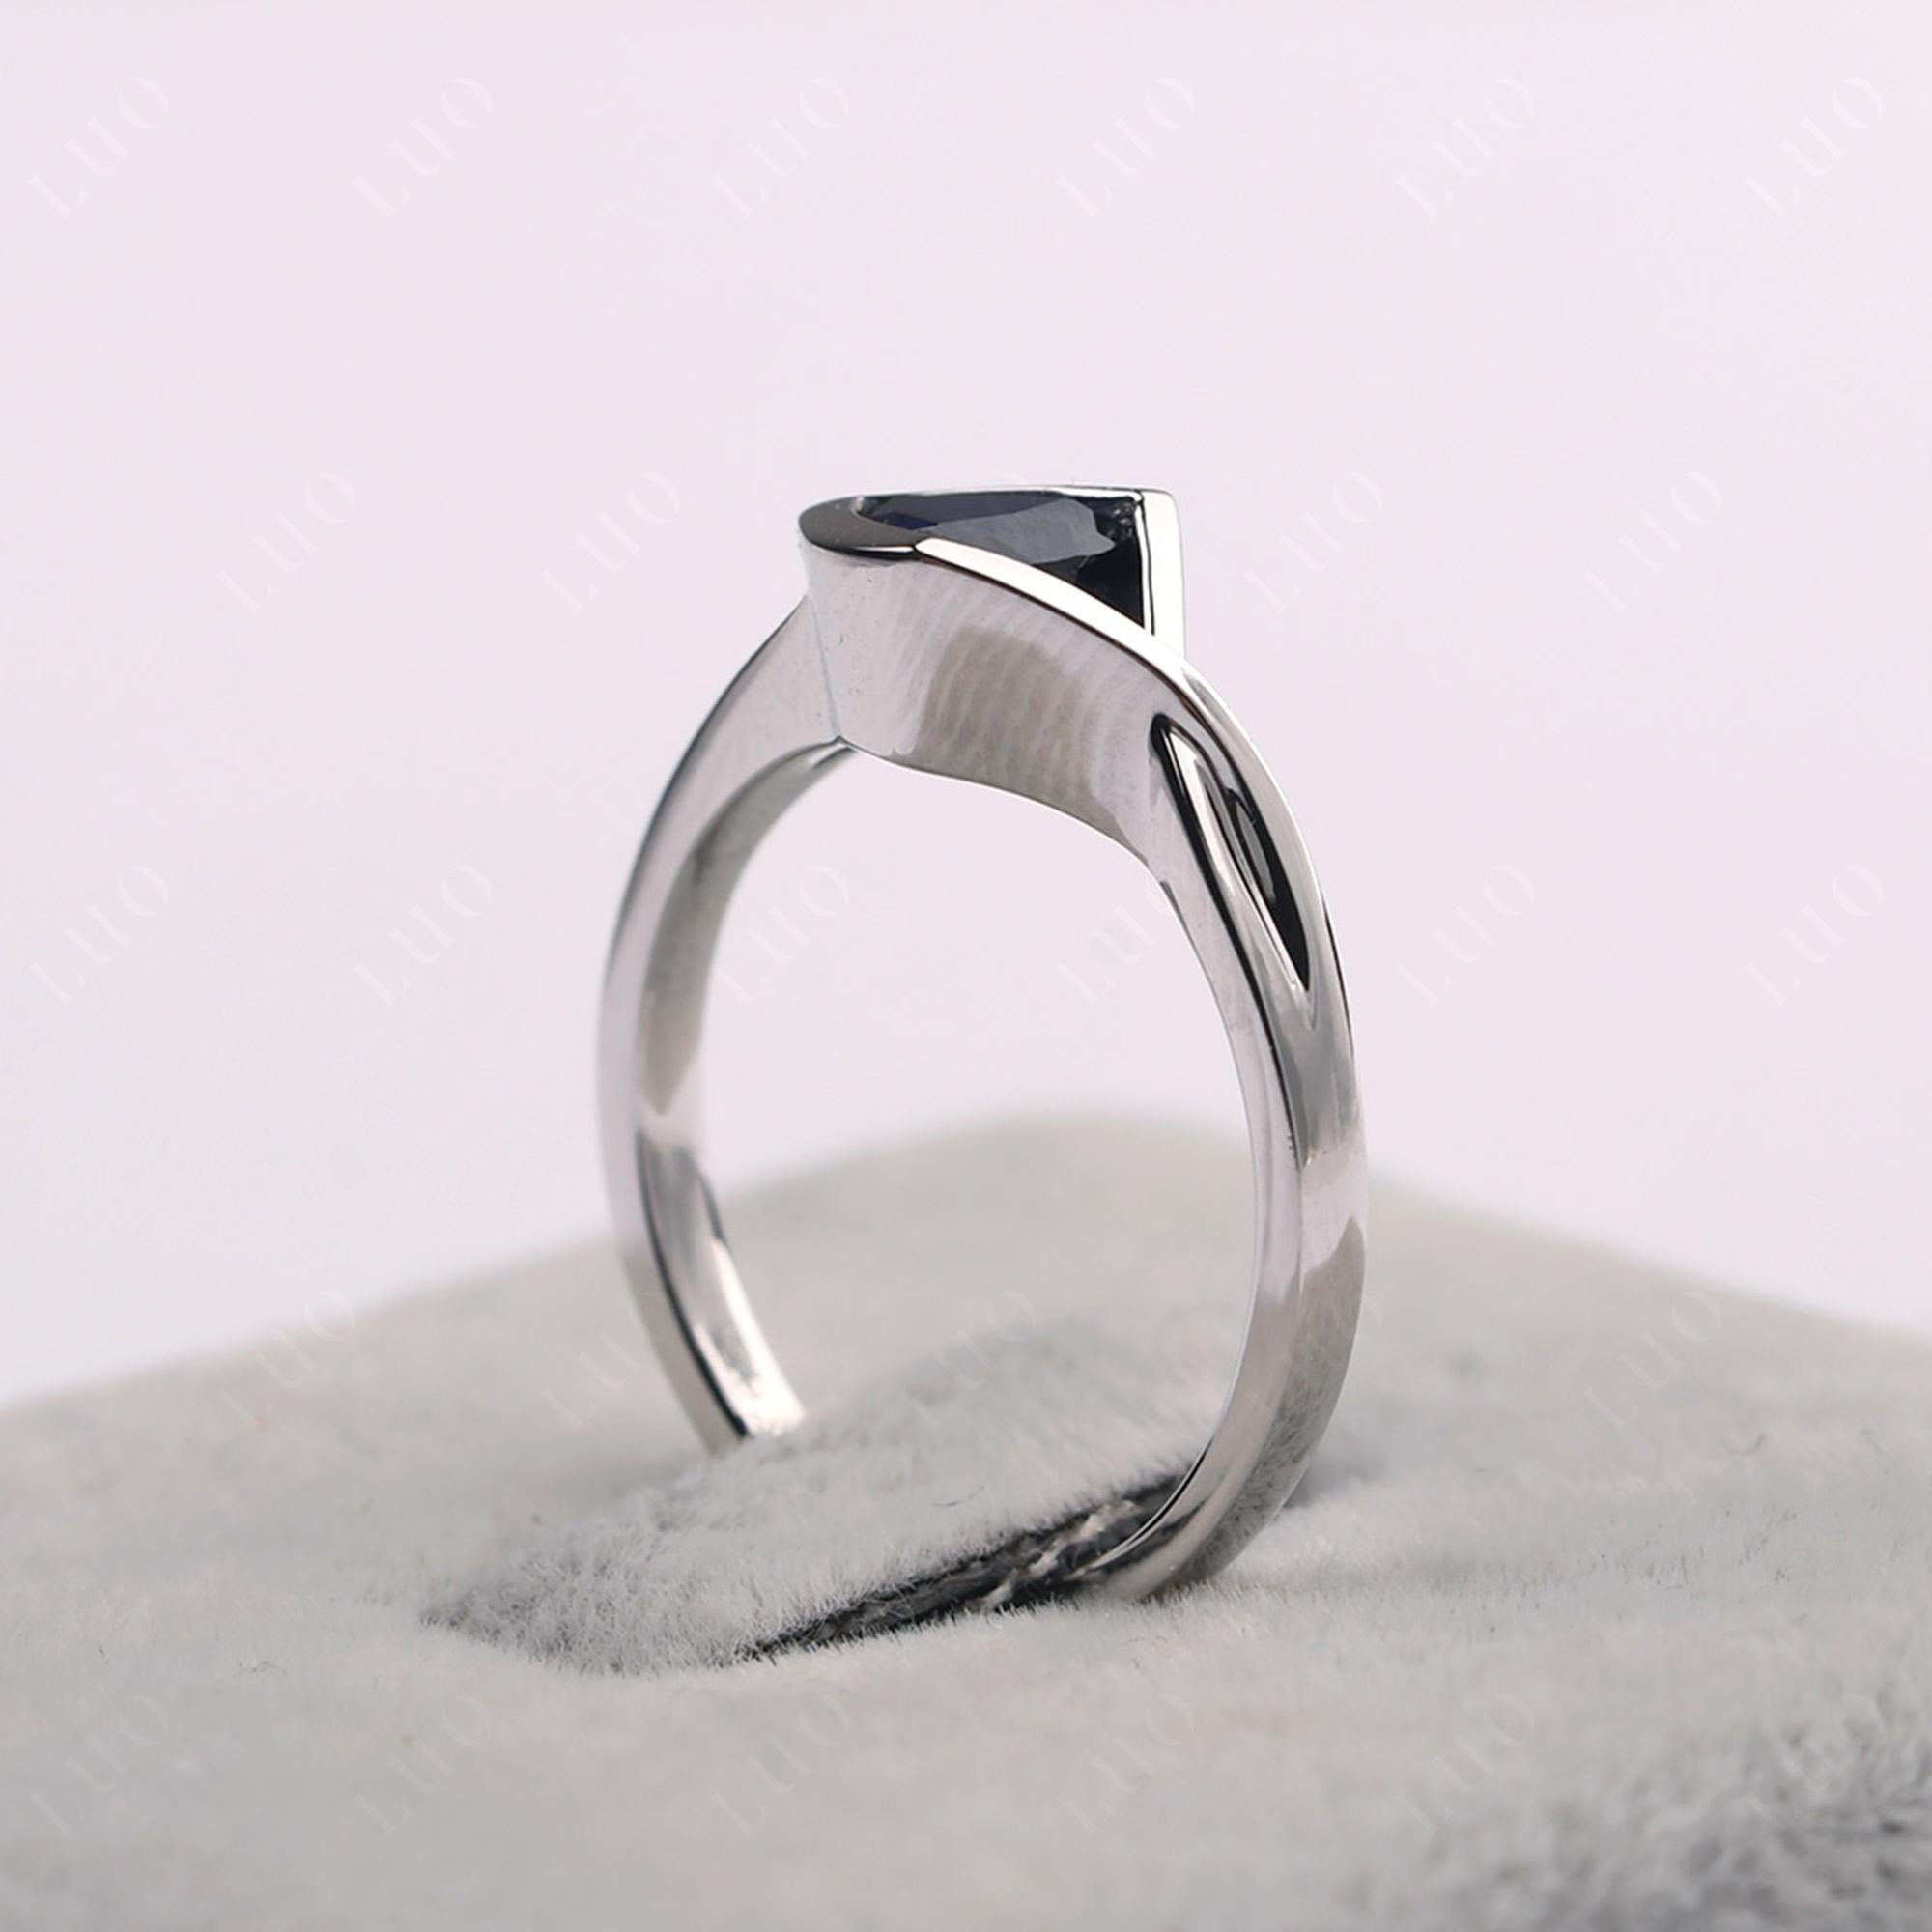 Trillion Cut Simple Lab Sapphire Ring - LUO Jewelry